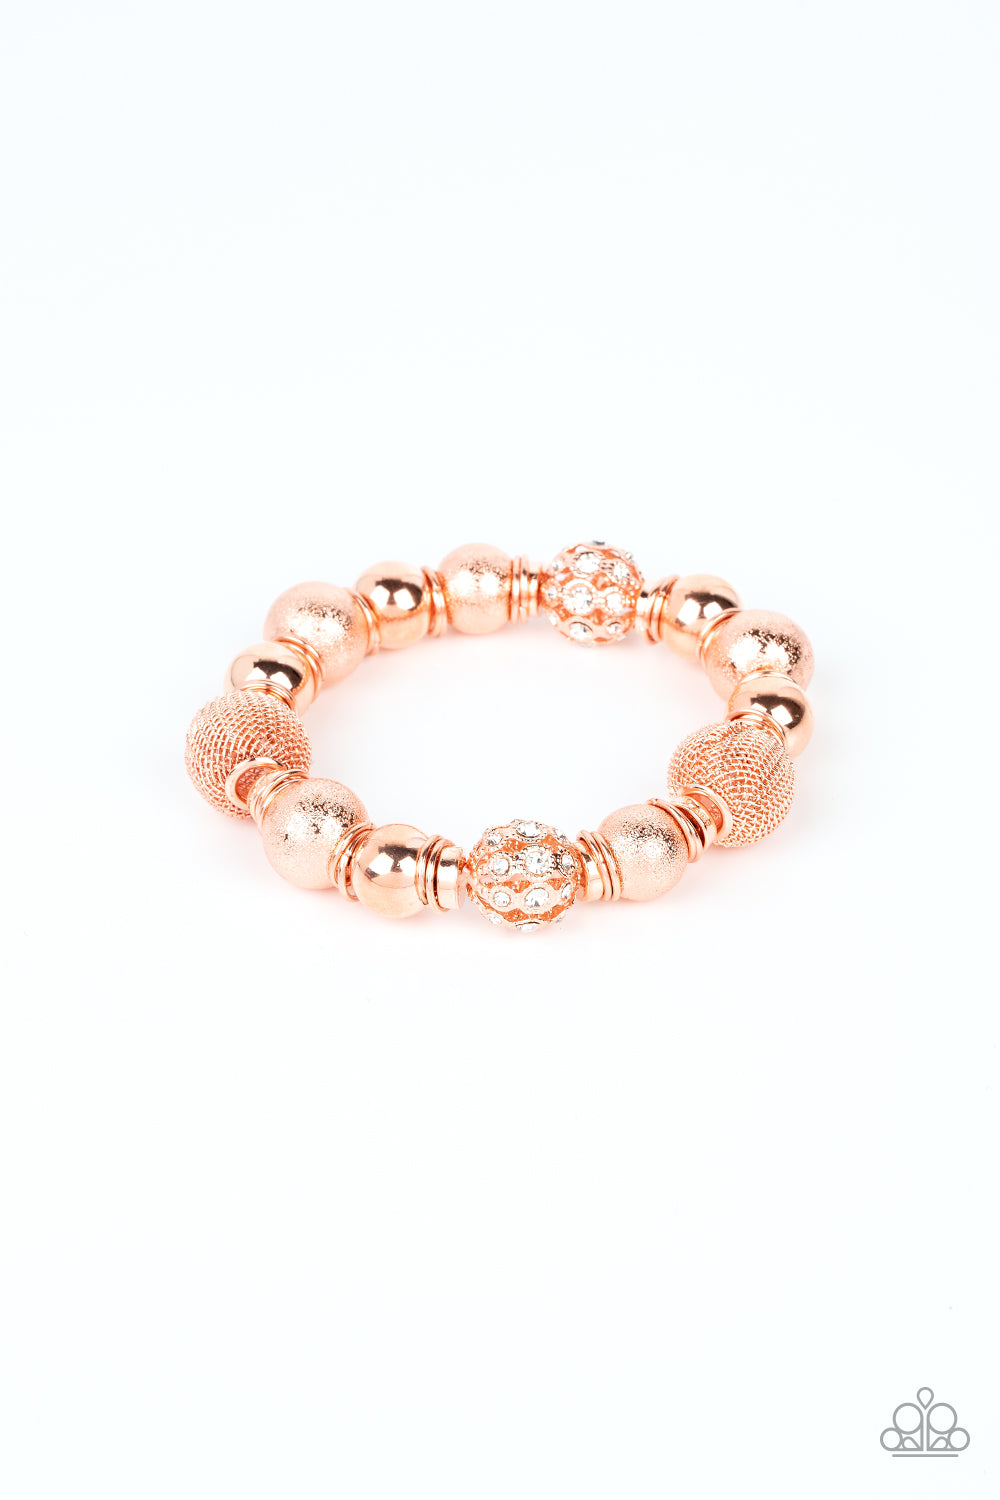 We Totally Mesh Copper Stretch Bracelet - Paparazzi Accessories